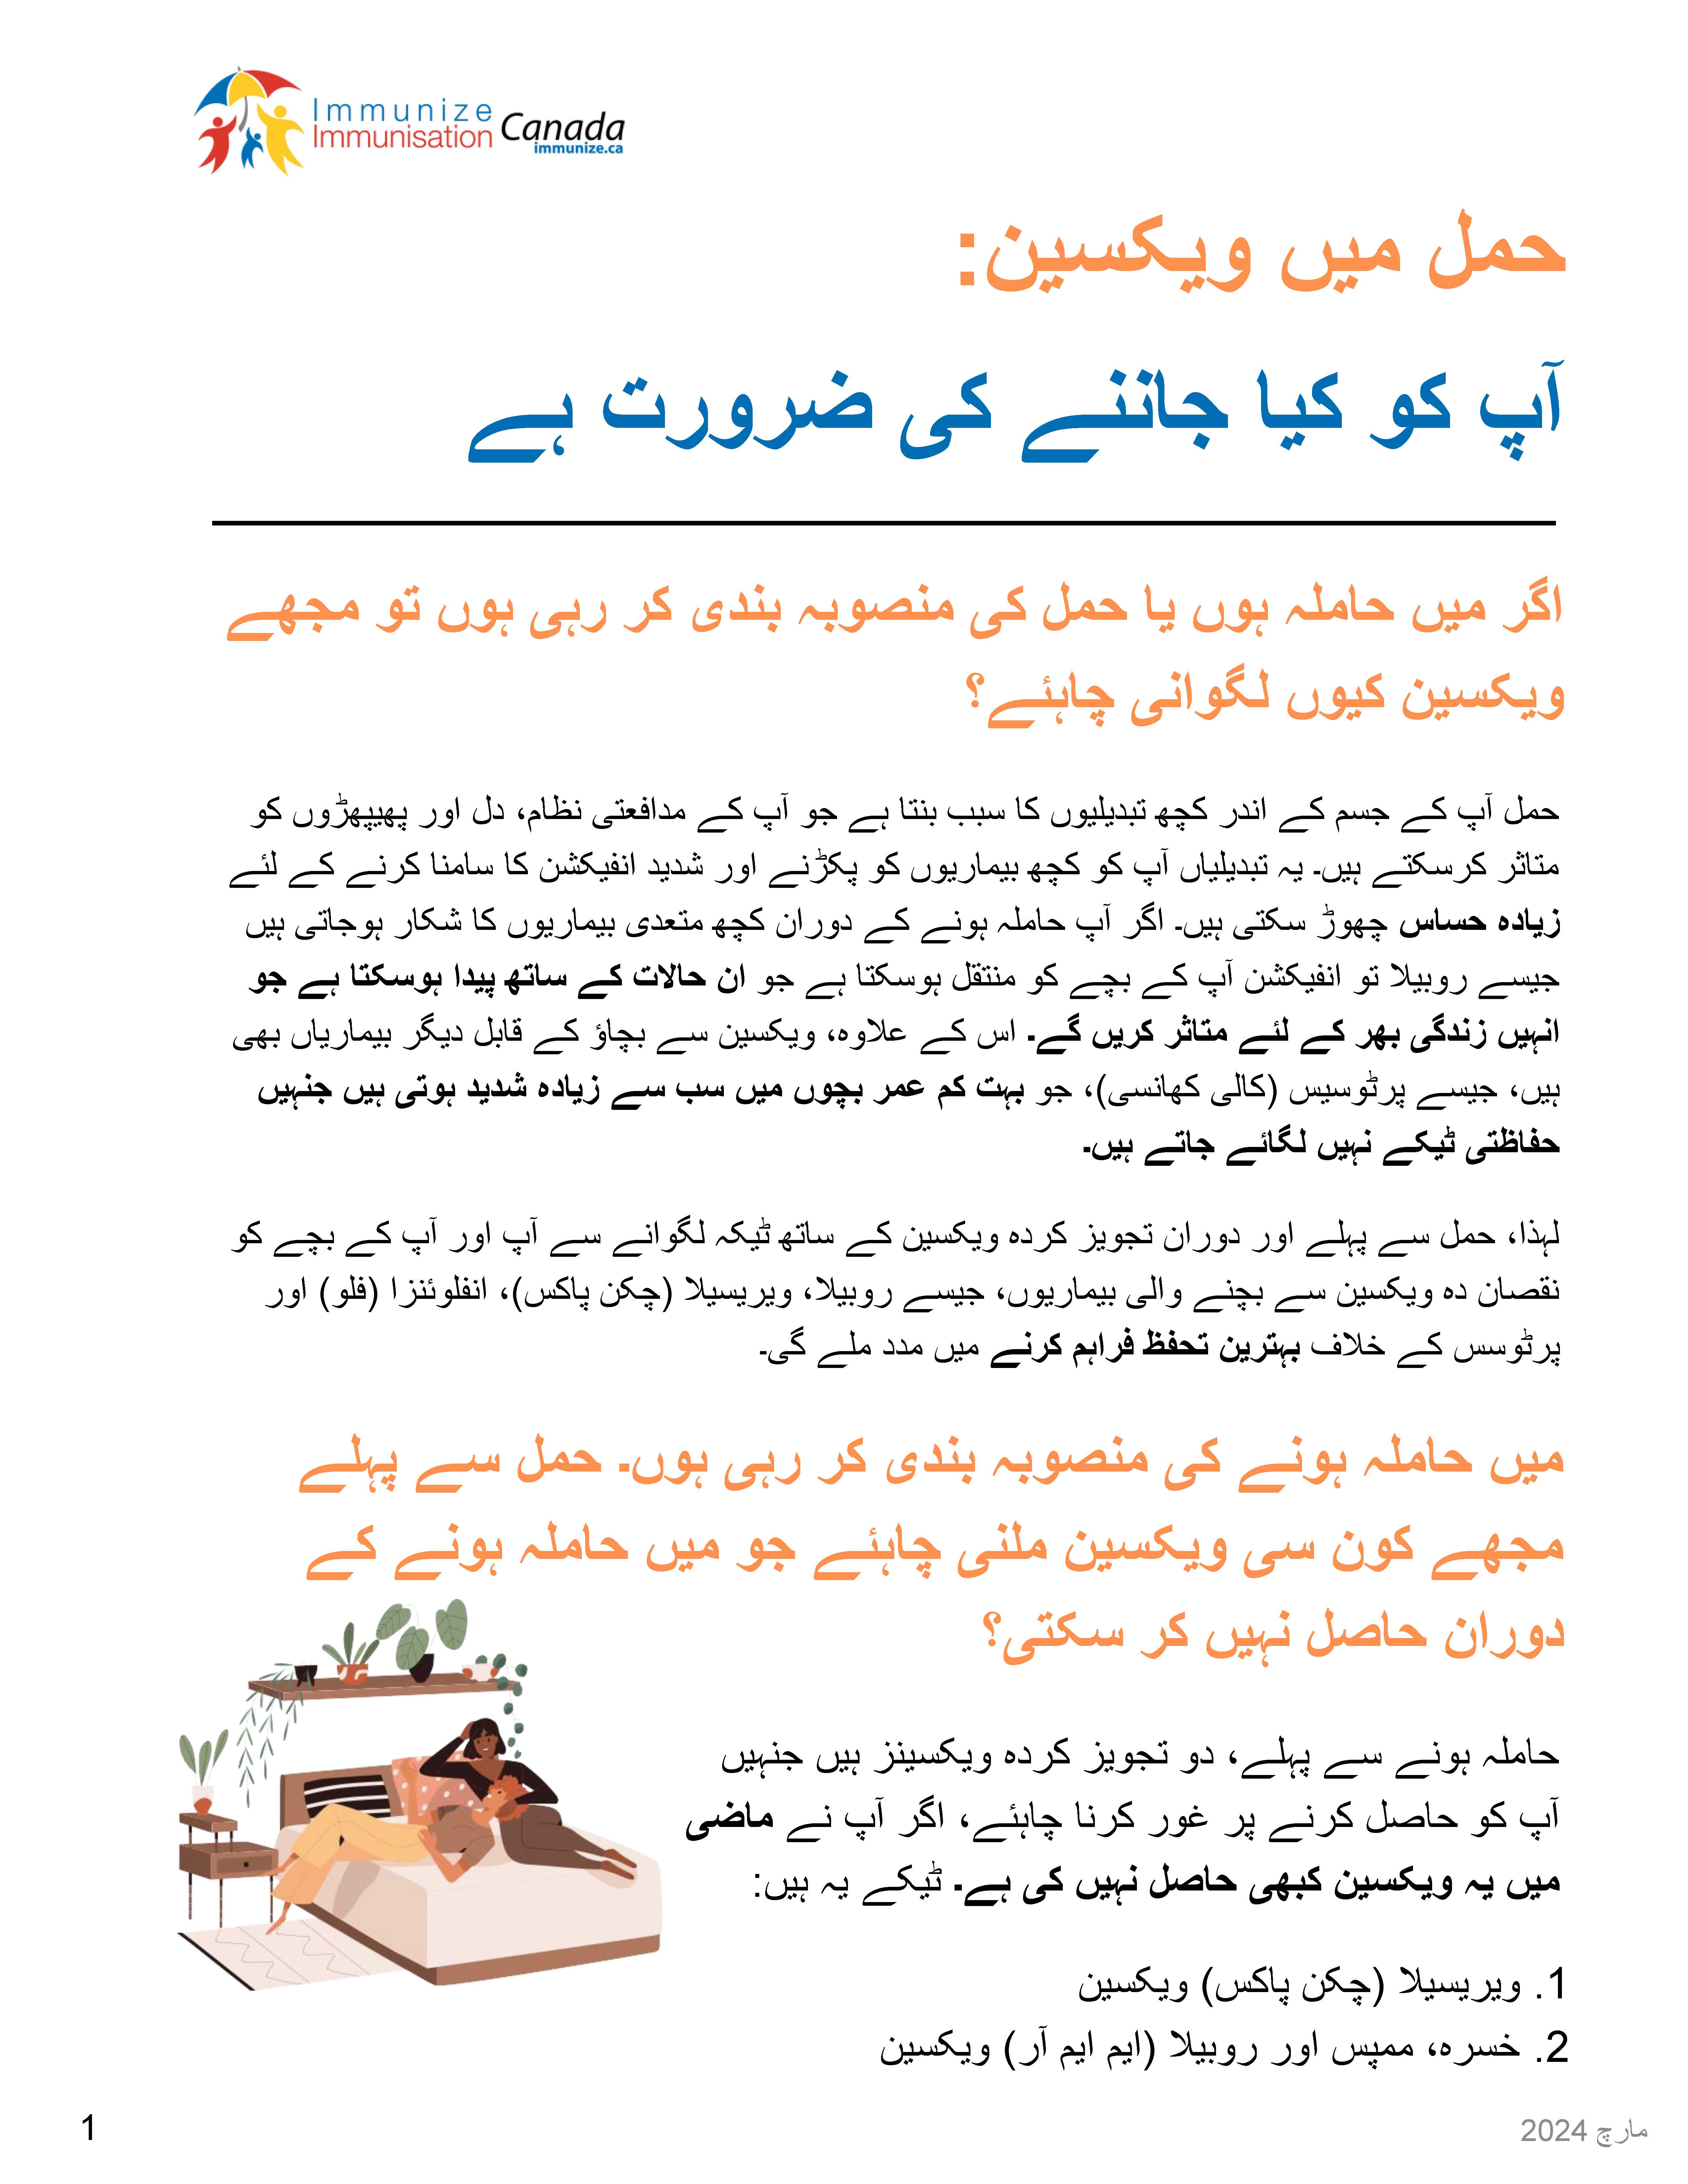 Vaccines in Pregnancy: What you need to know (factsheet in Urdu)